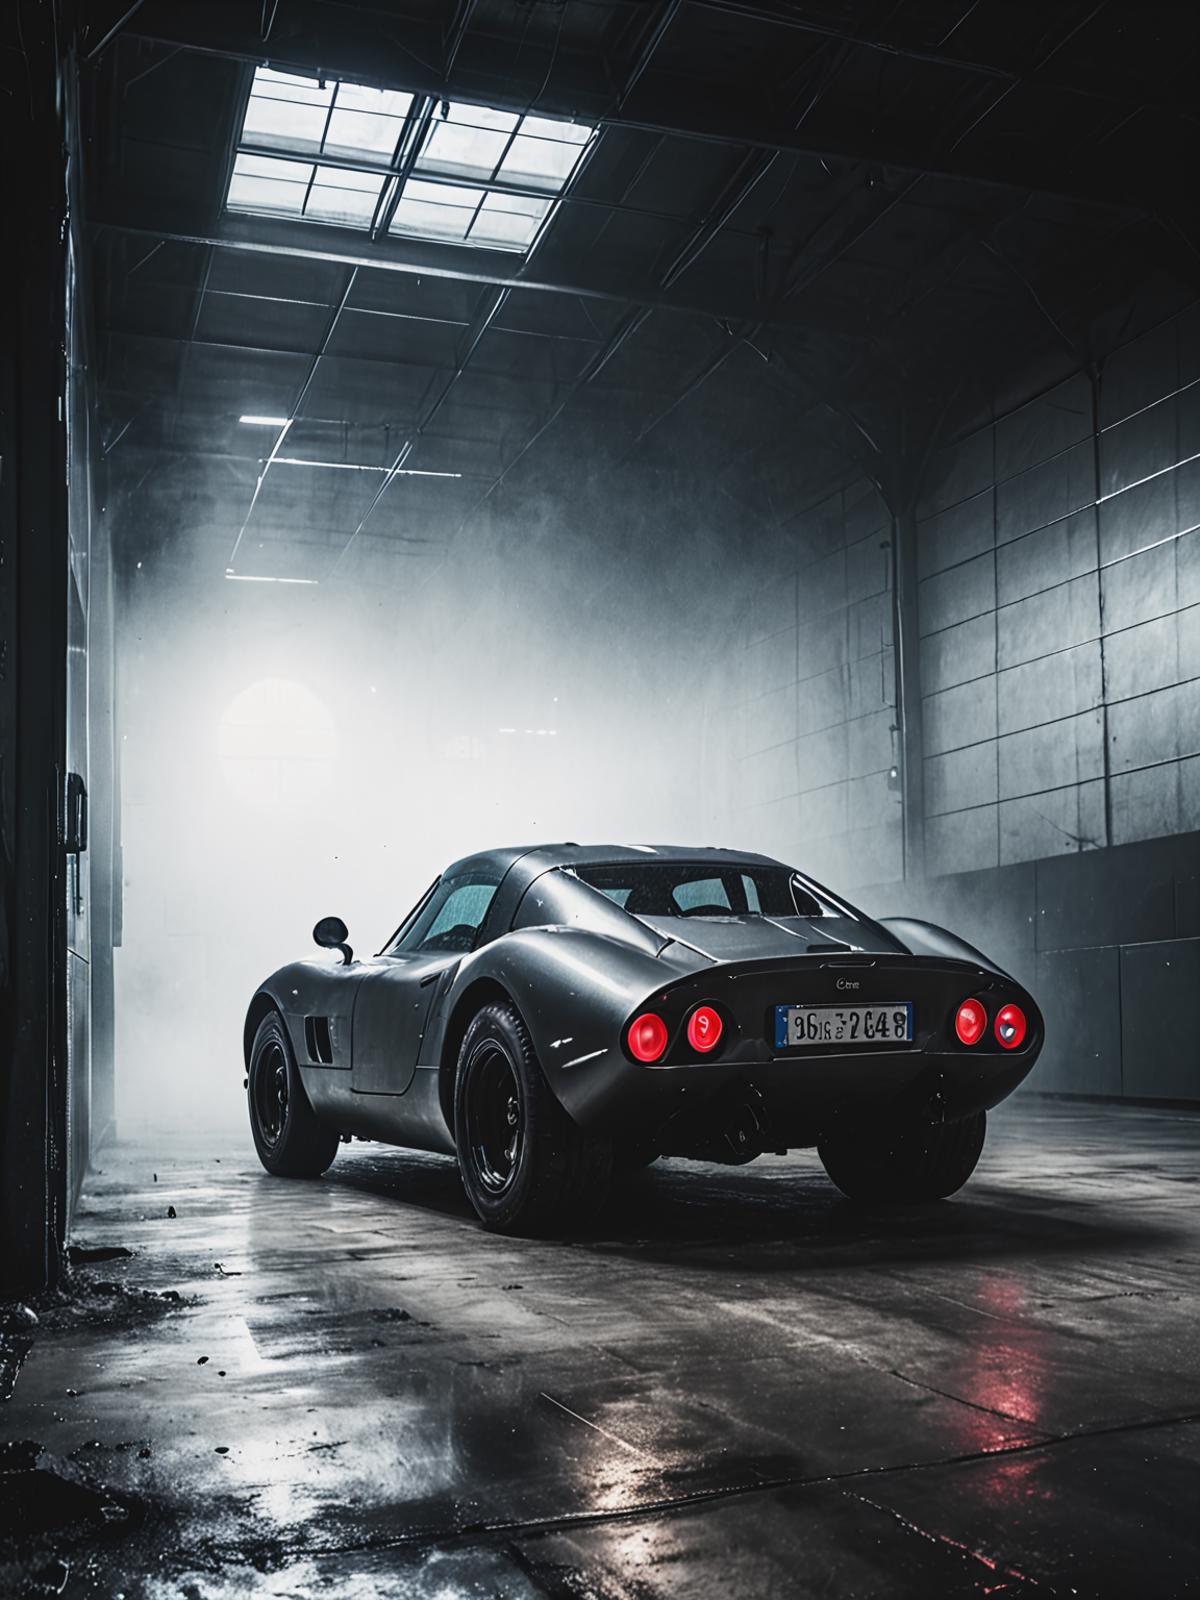 A black sports car parked in a garage with fog in the background.